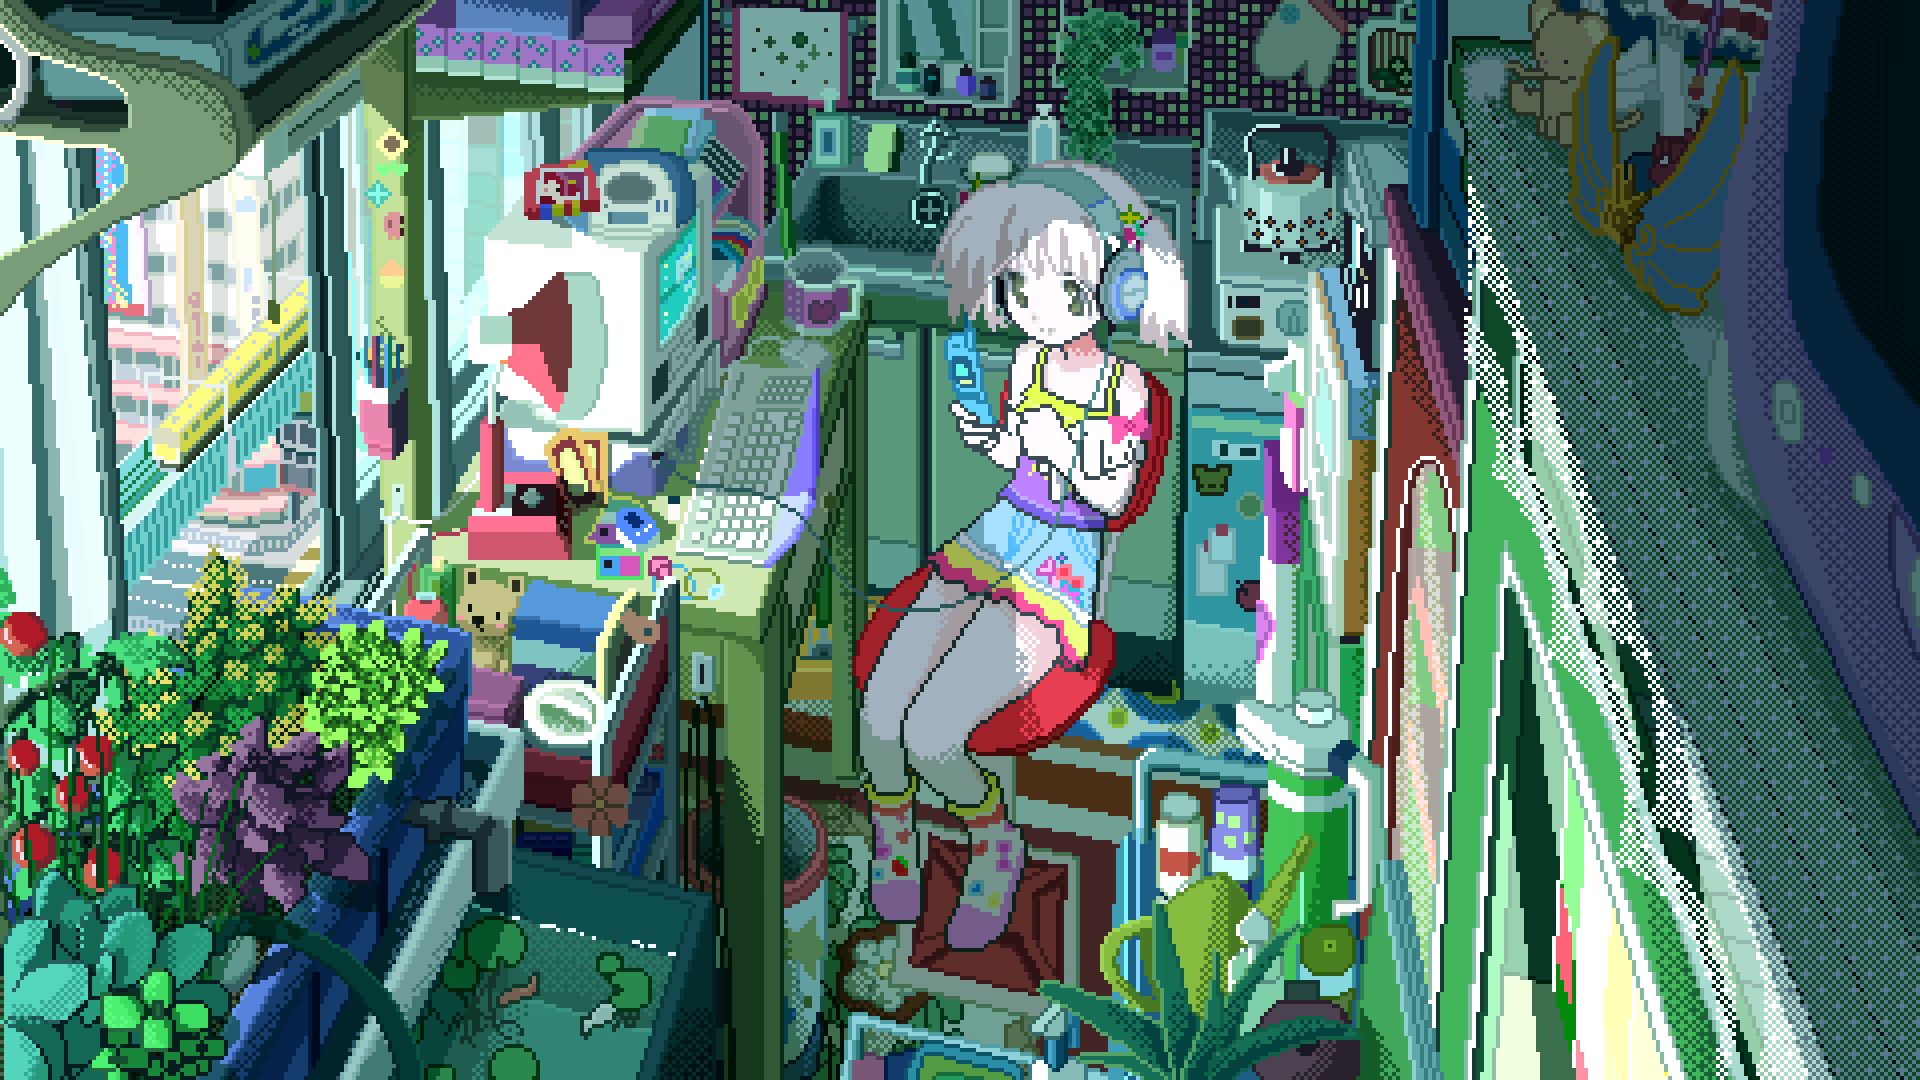 1girl anbiyori aquarium camisole cellphone chair computer cup desk_lamp dithering faucet fish flip_phone flower green_camisole headphones highres holding holding_phone indoors kettle keyboard_(computer) lamp lily_pad medium_hair mug office_chair original pedestrian_bridge phone pixel_art plant potted_plant purple_camisole sink sitting skirt soap_dispenser socks solo spaghetti_strap stuffed_animal stuffed_toy swivel_chair table teddy_bear twintails white_hair wind window